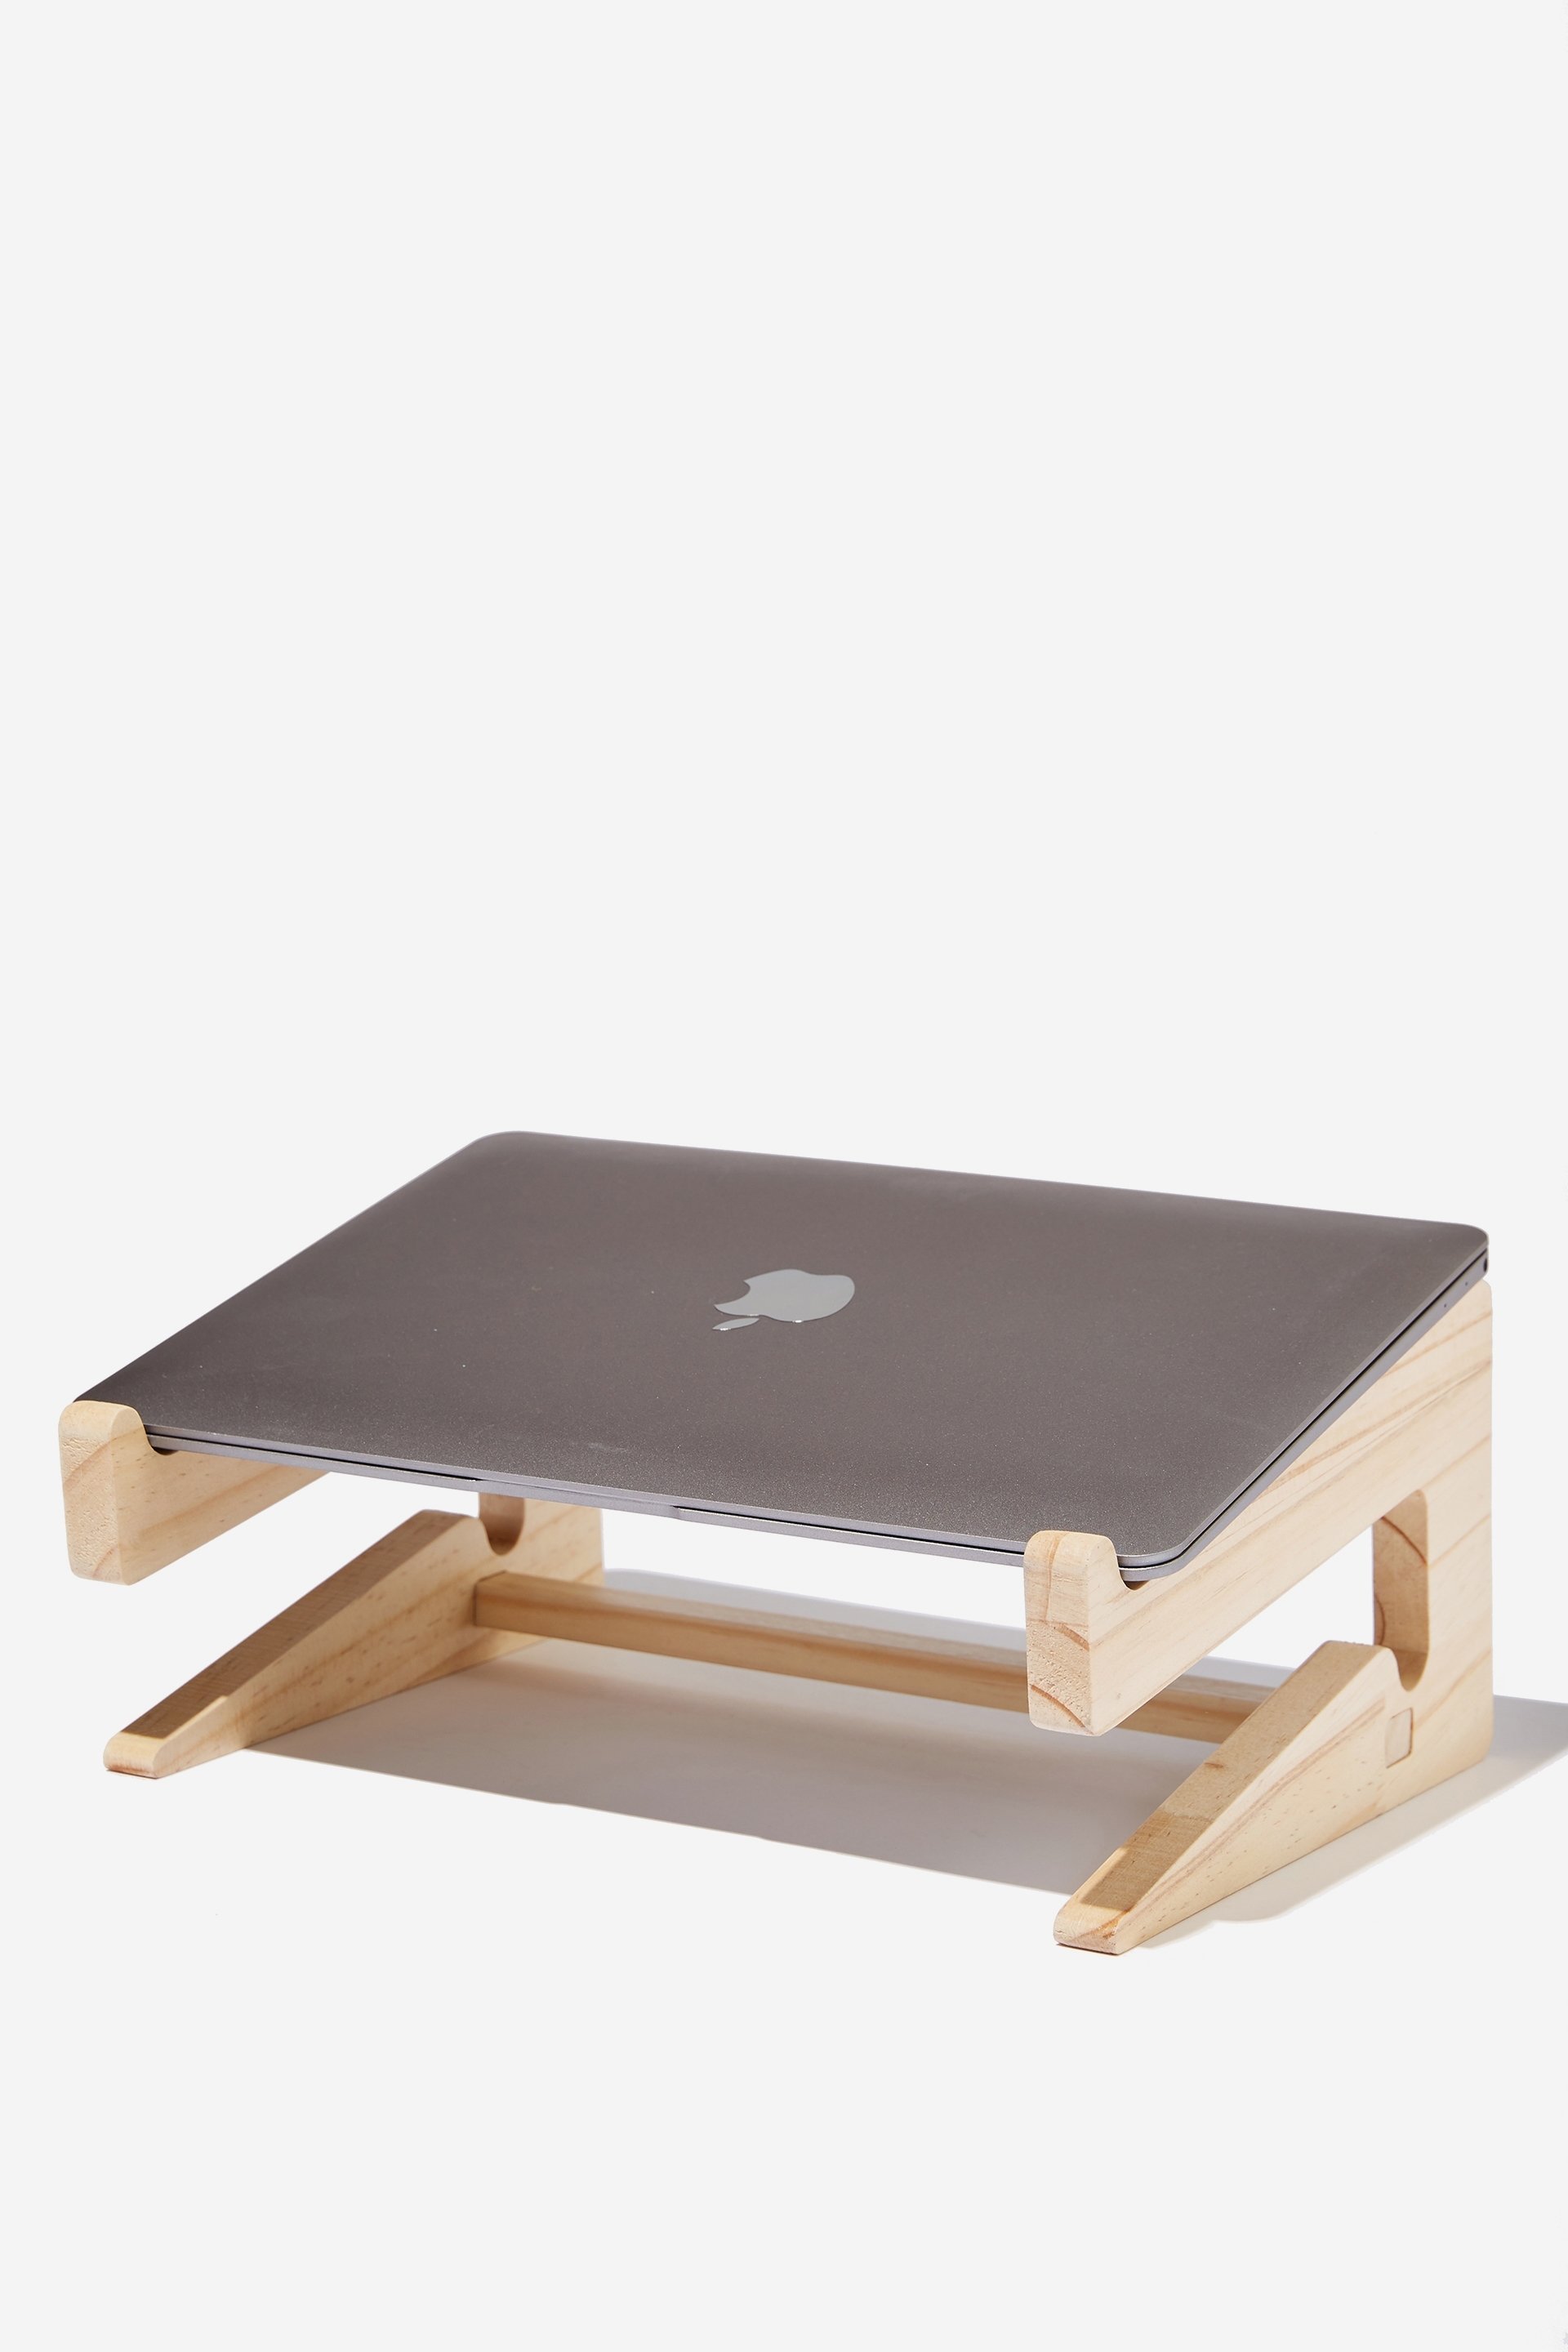 Typo - Collapsible Laptop Stand - Natural